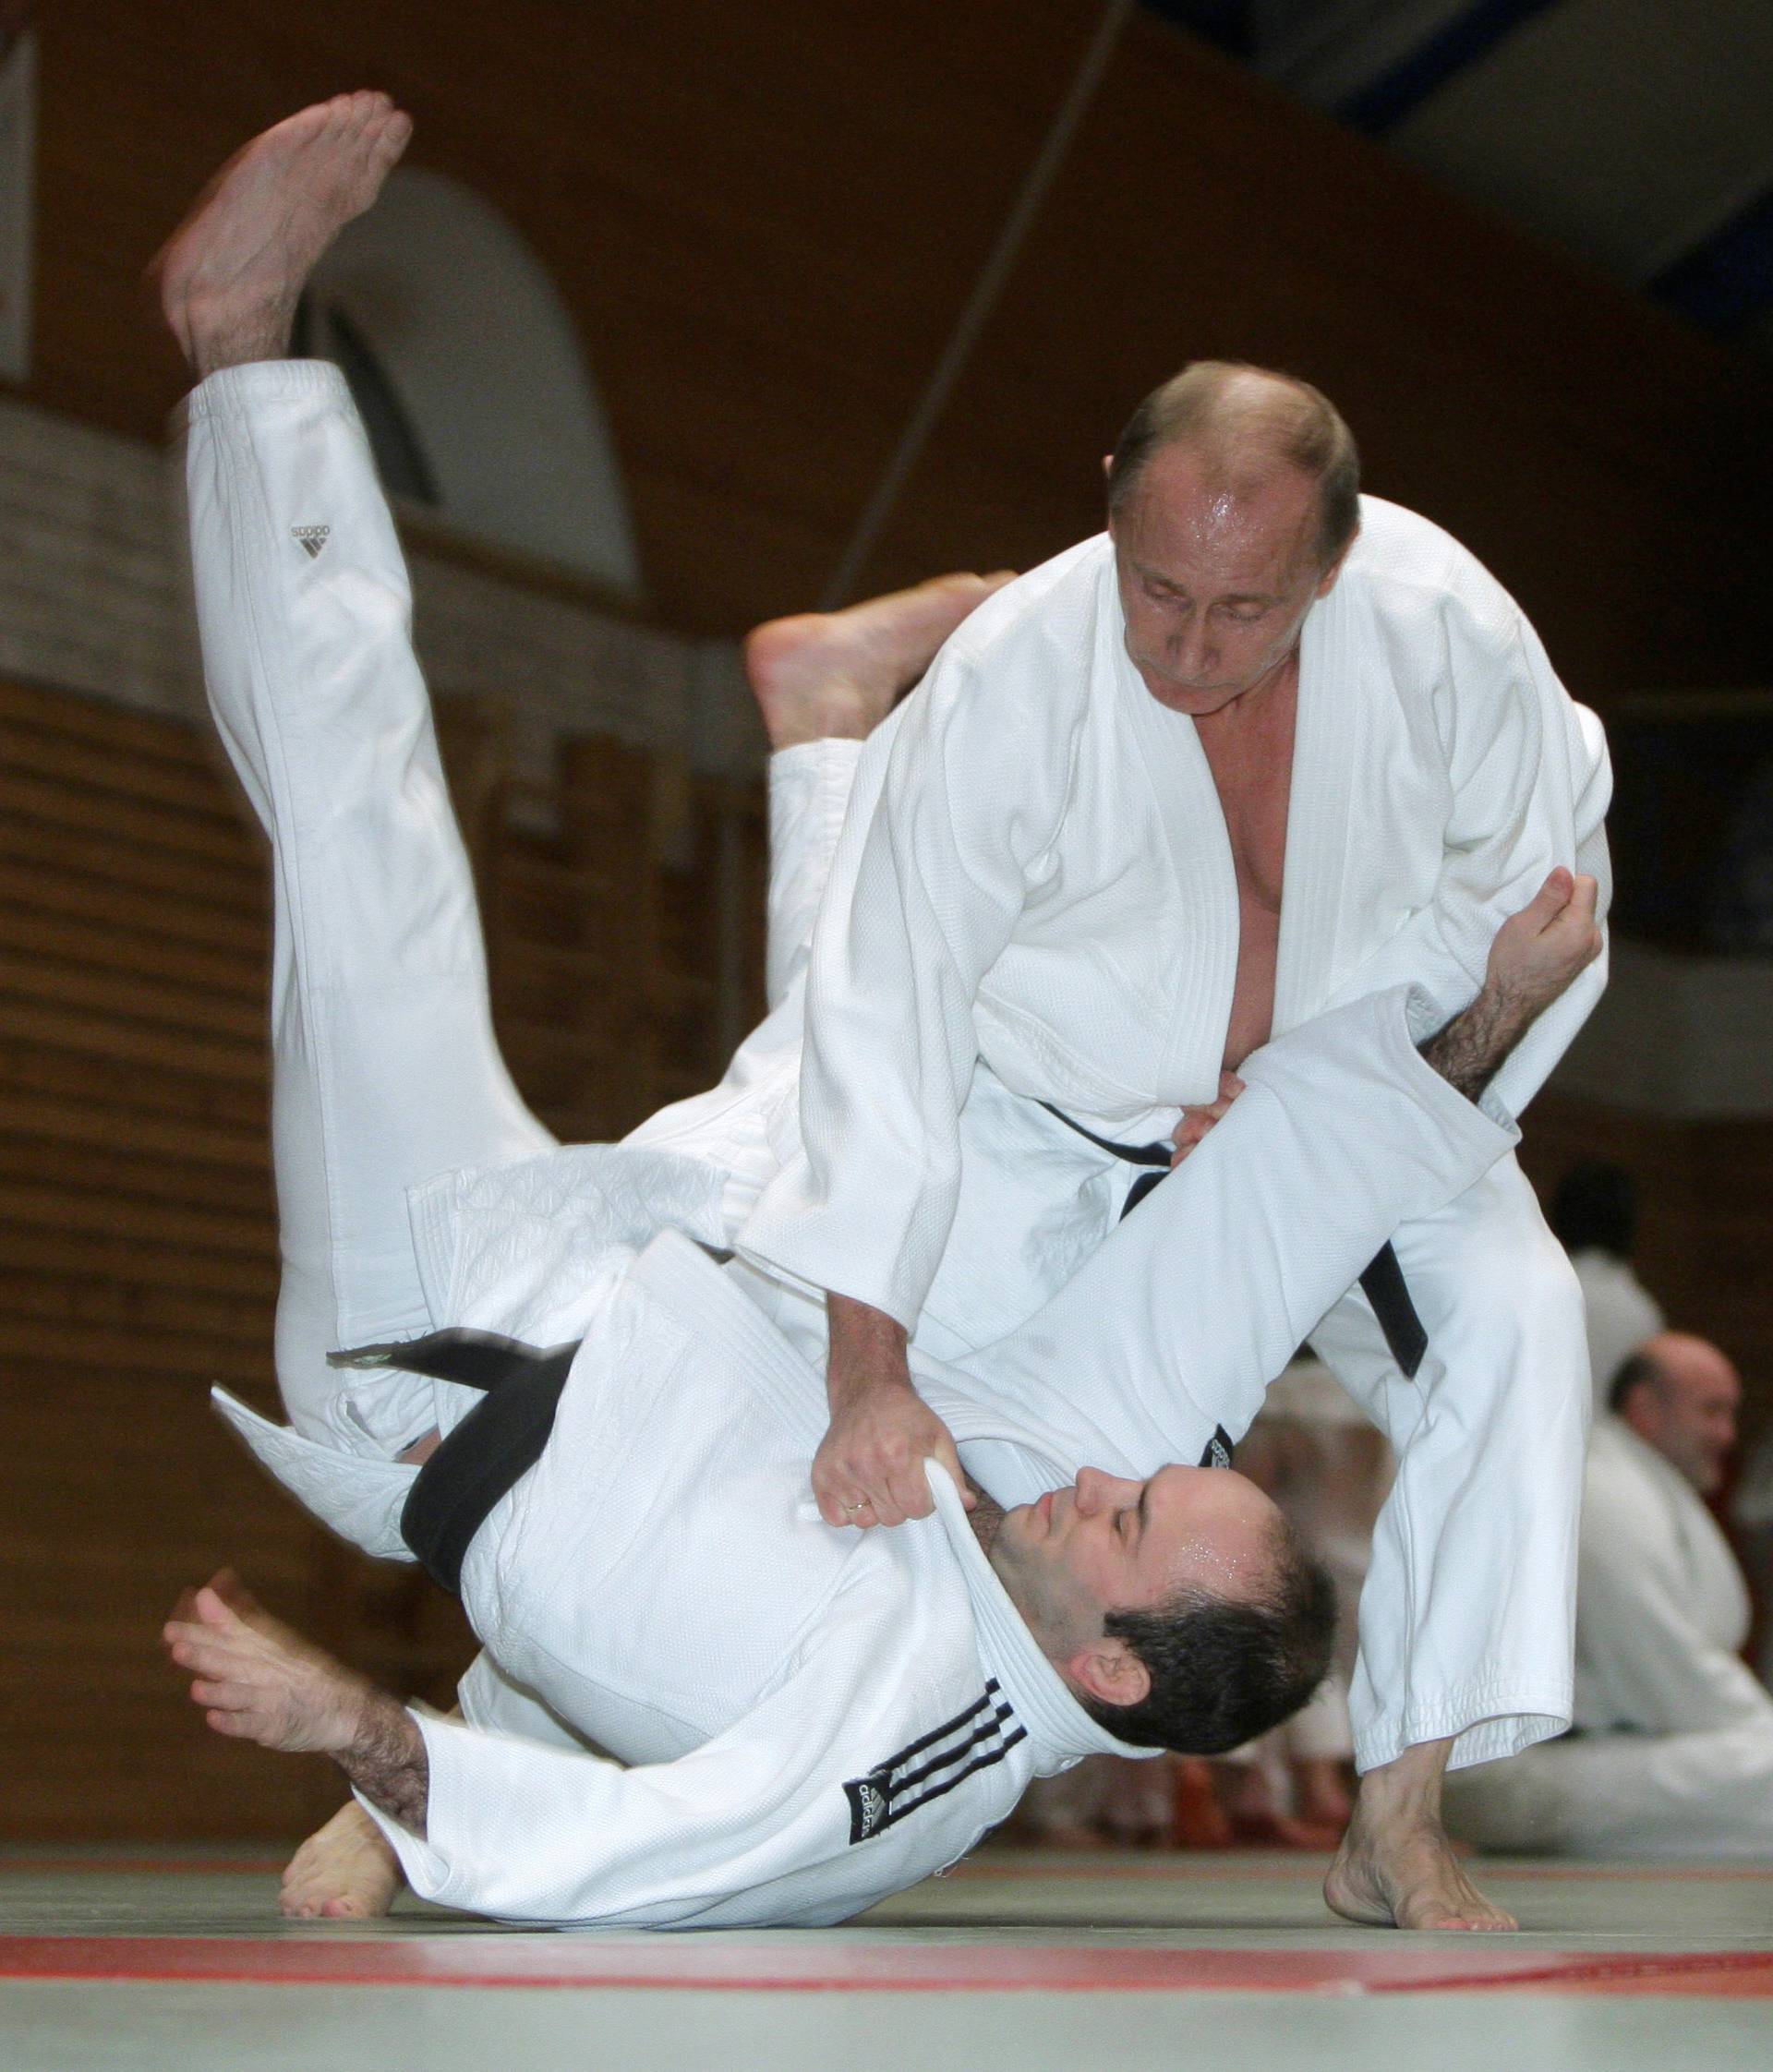 FILE PHOTO: Russia's Prime Minister Vladimir Putin attends a judo training session at Top Athletic School in St. Petersburg